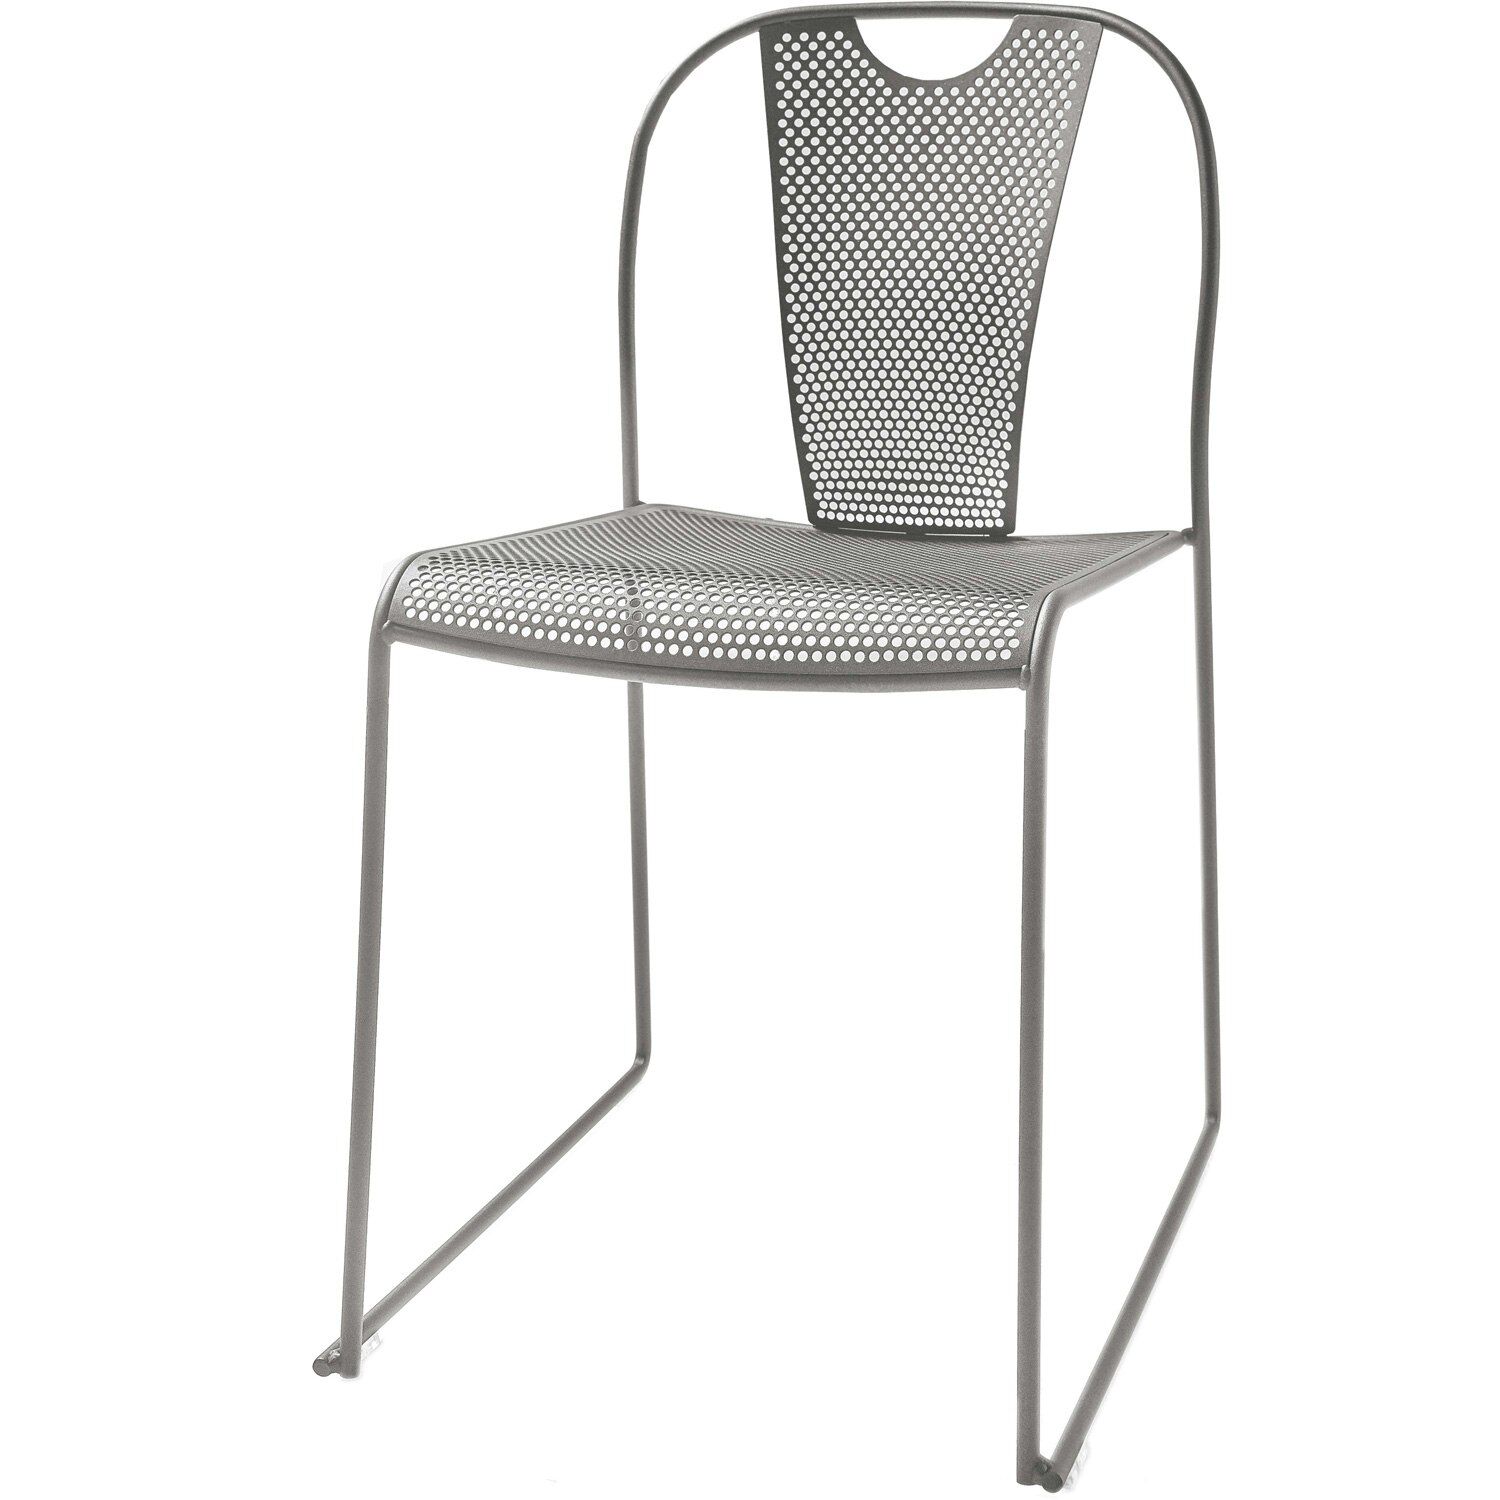 SMD Design -Piazza Chair, Light Gray